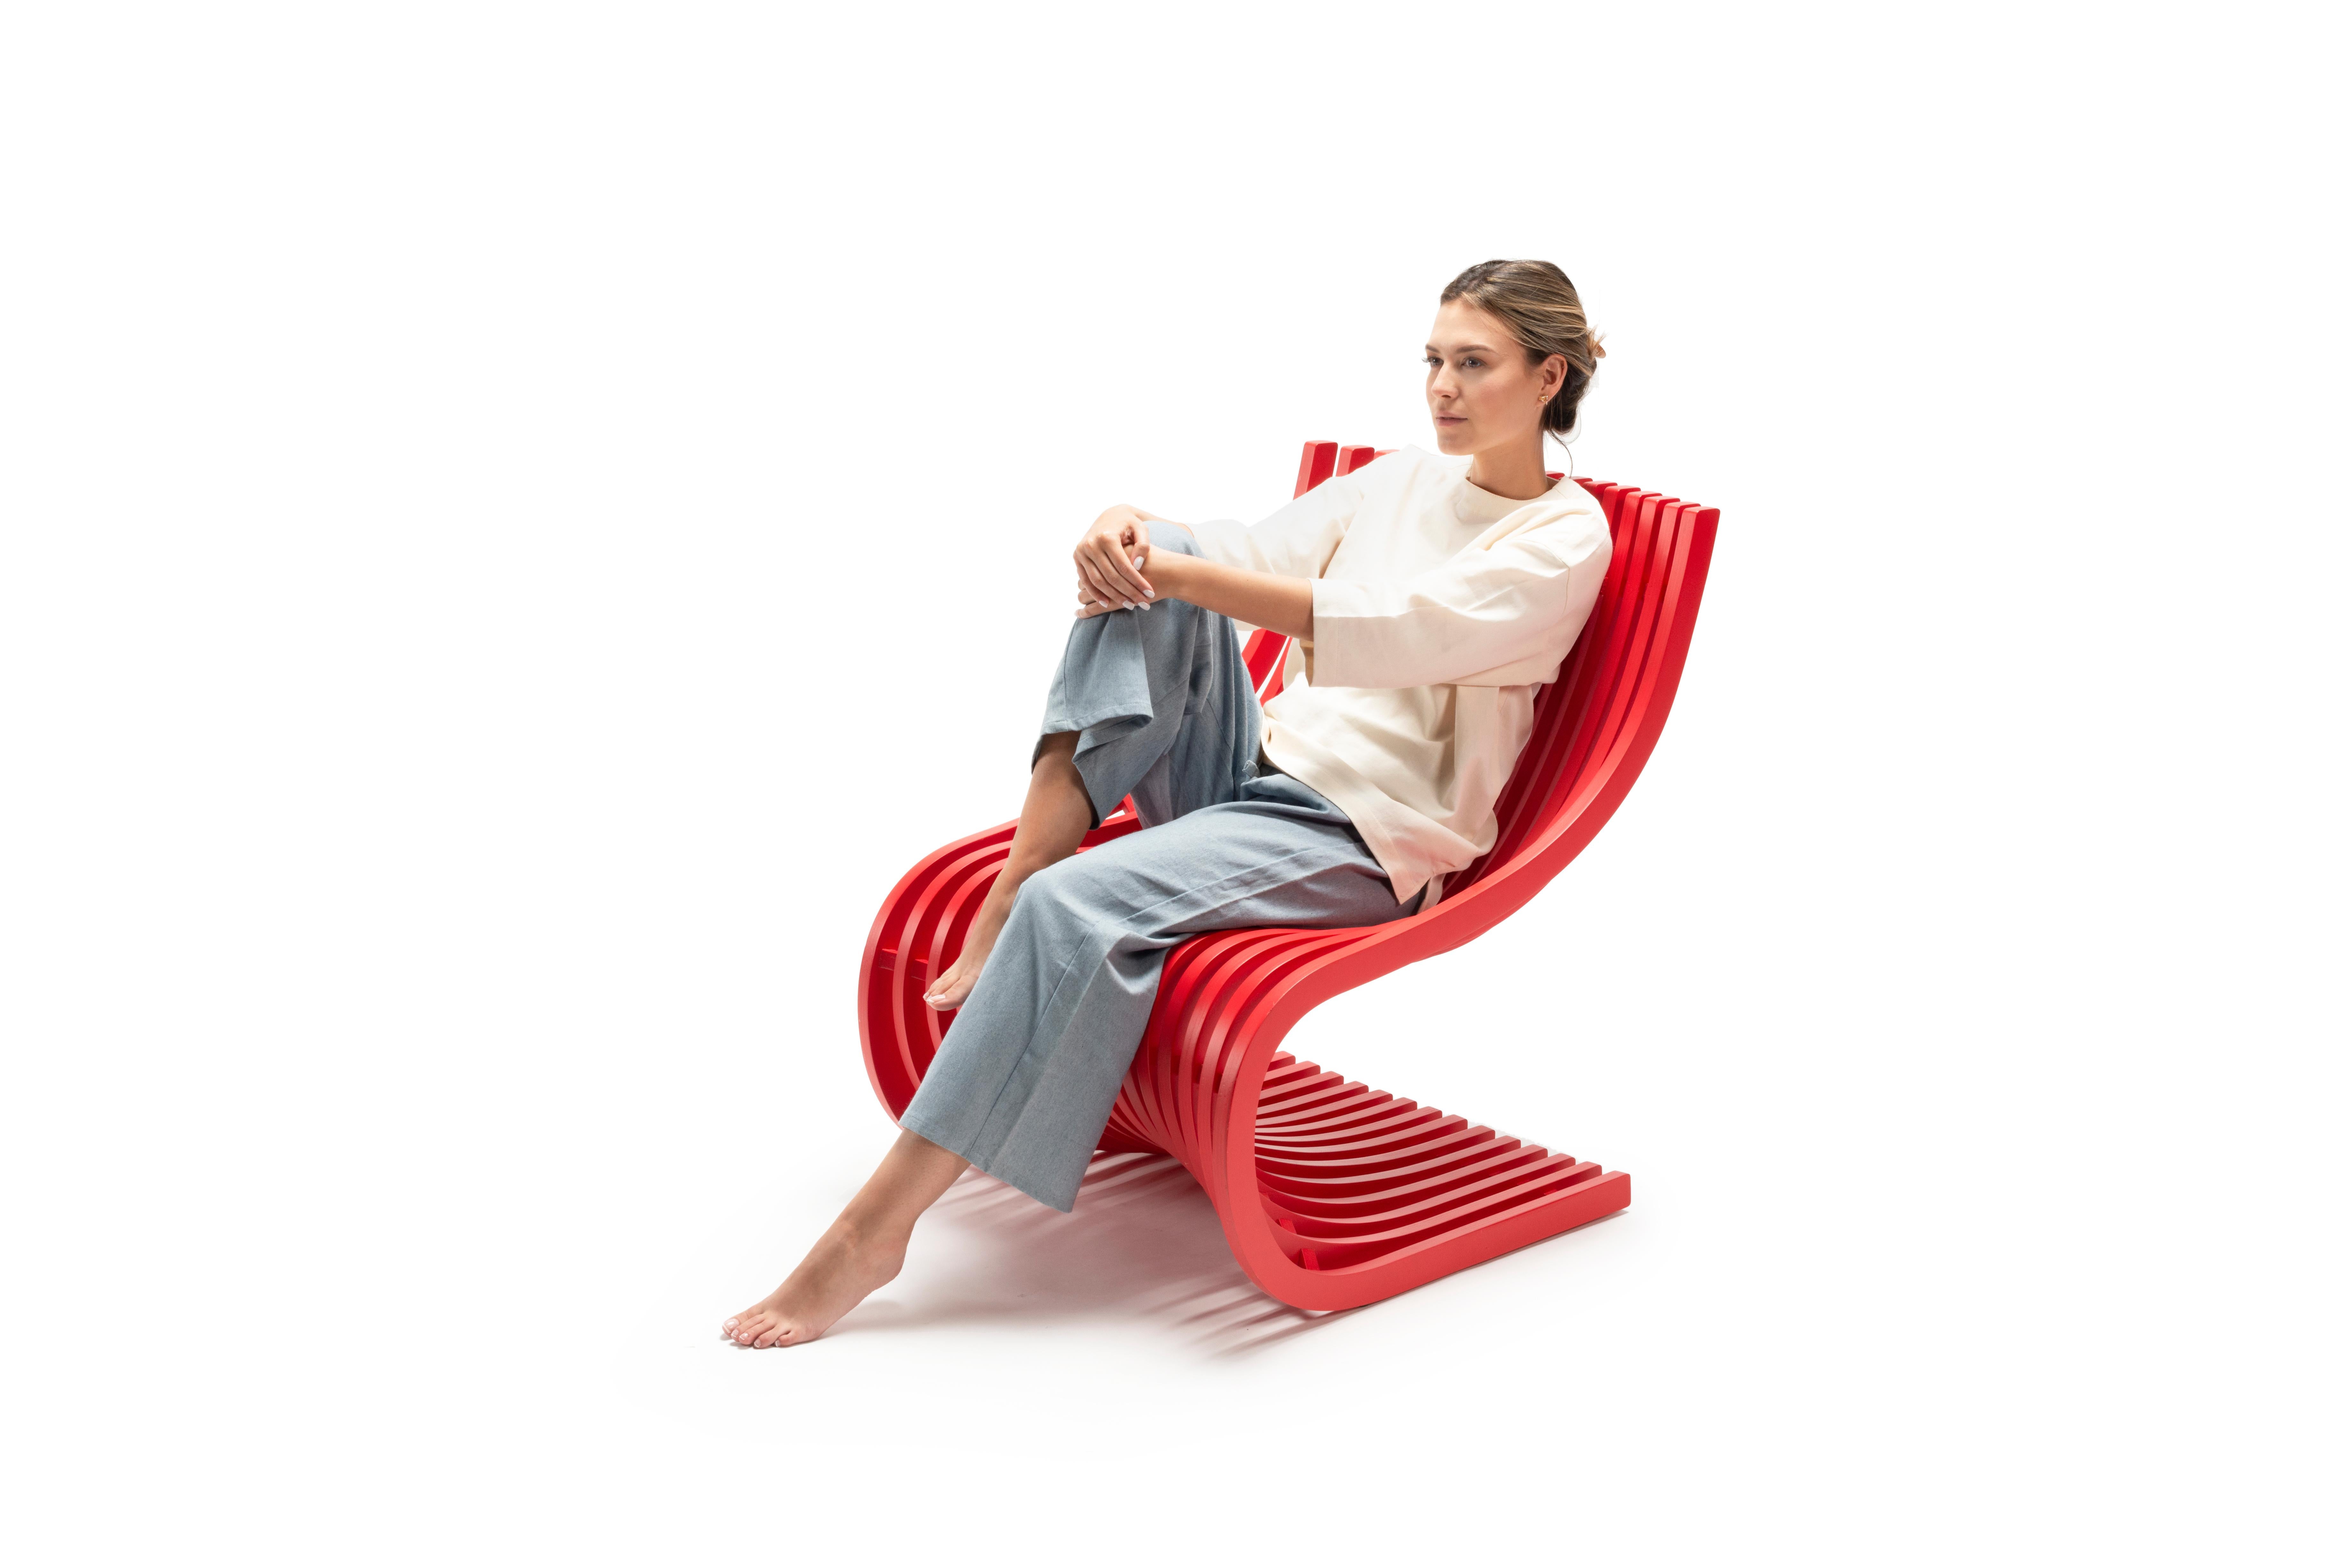 Guatemalan Double S Chair by Piegatto, a Sculptural Contemporary Chair For Sale